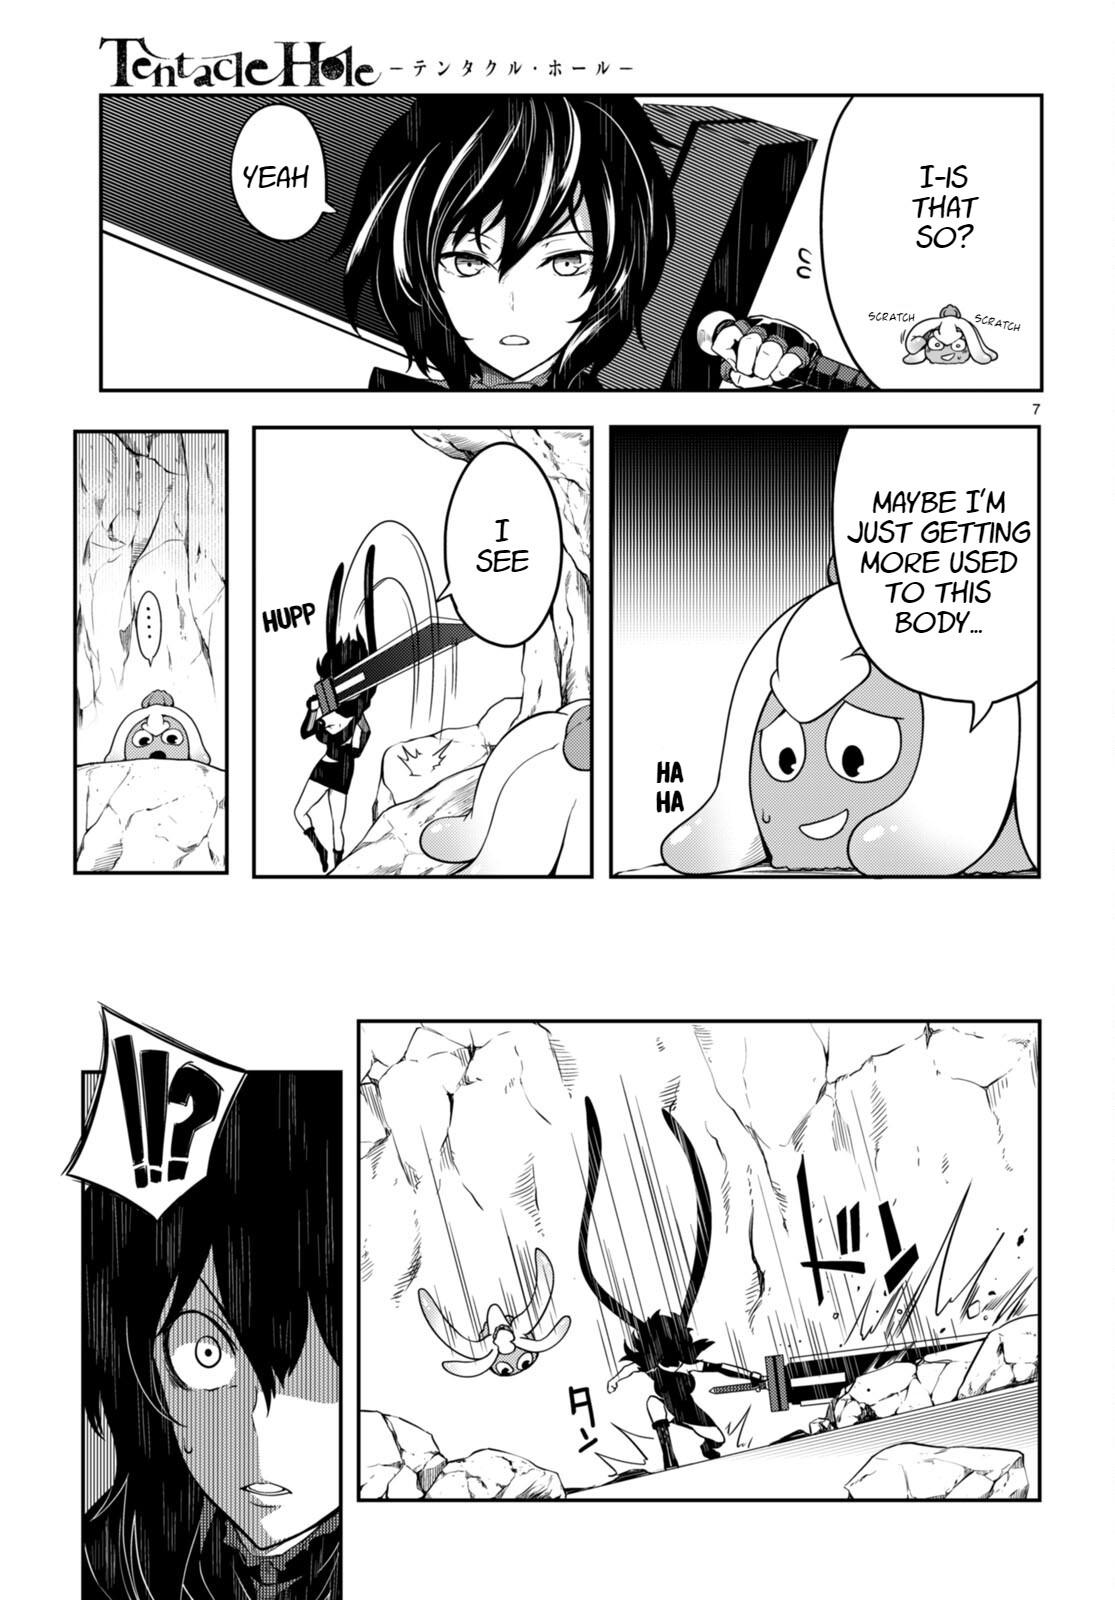 Tentacle Hole Chapter 11 7